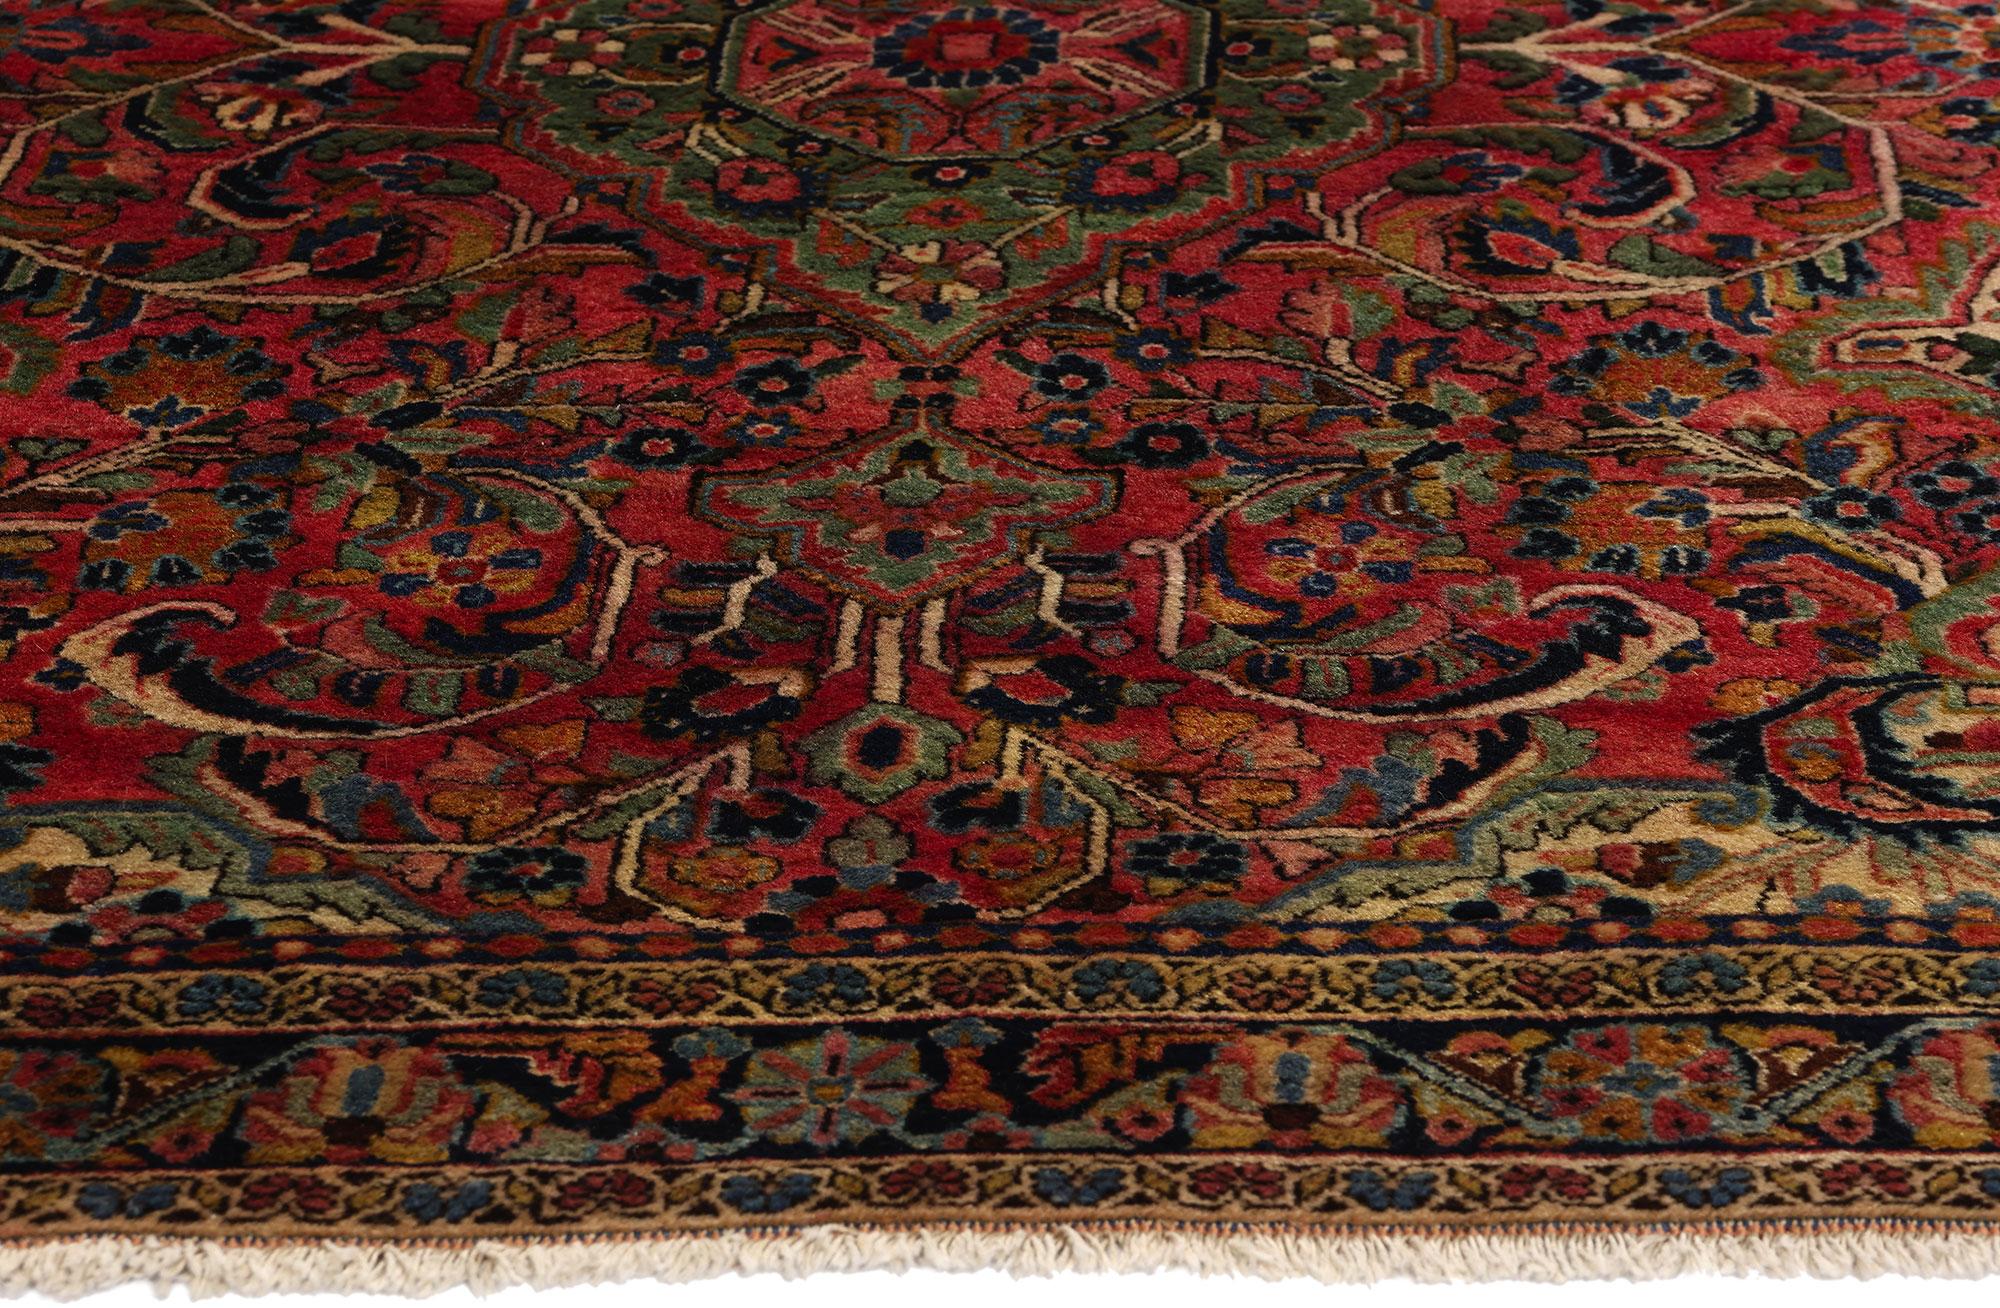 1920s Antique Red Persian Farahan Sarouk Wool Rug with Timeless Elegance In Good Condition For Sale In Dallas, TX